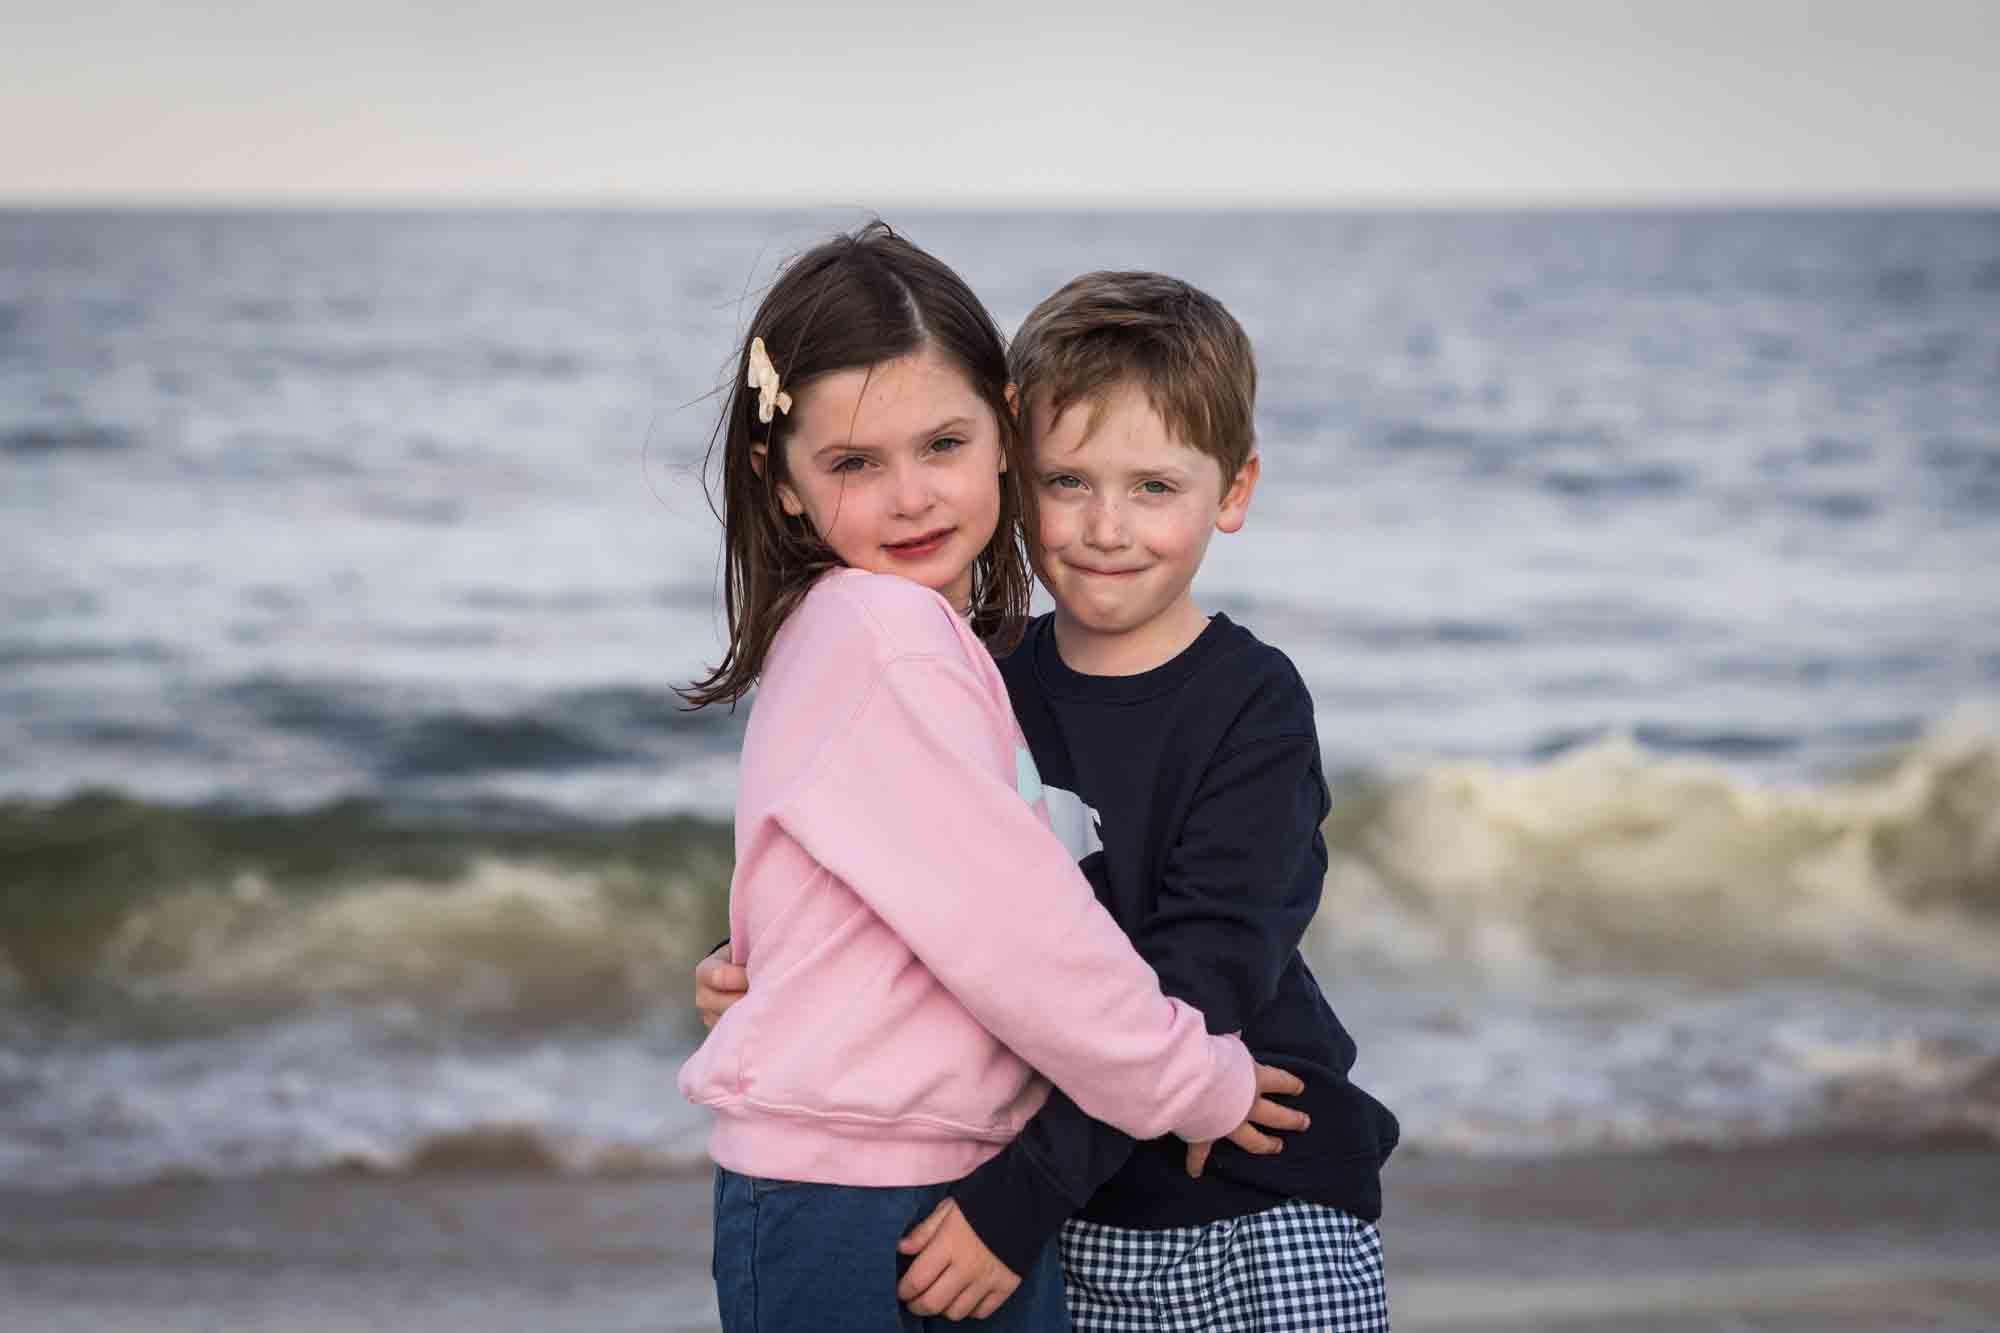 Little boy and girl hugging on beach in front of ocean